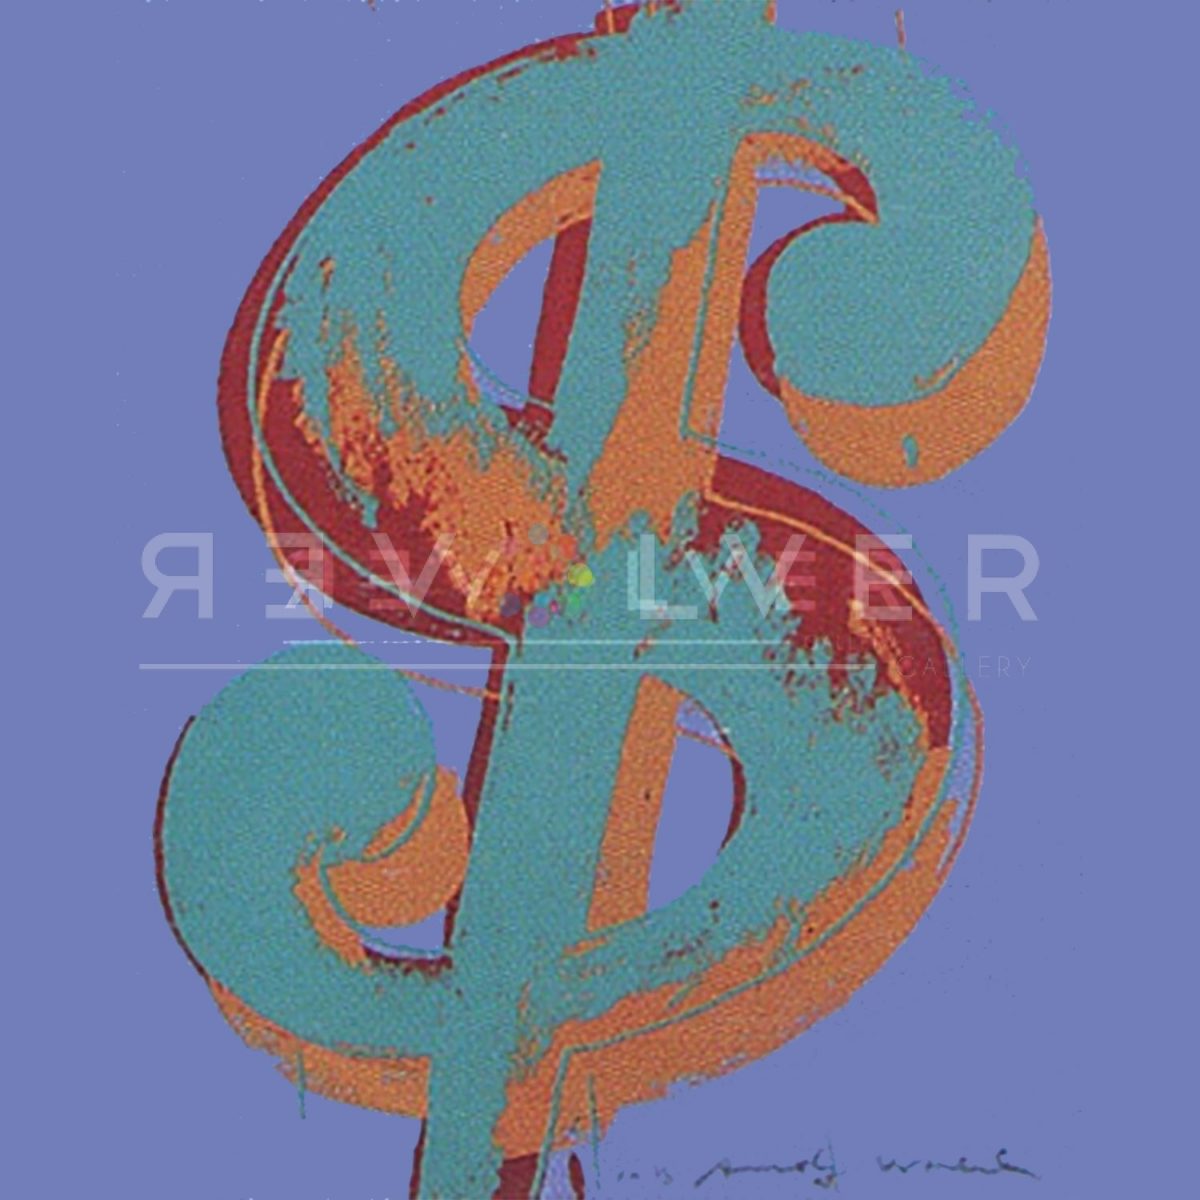 Dollar Sign 277 by Andy Warhol | Revolver Gallery